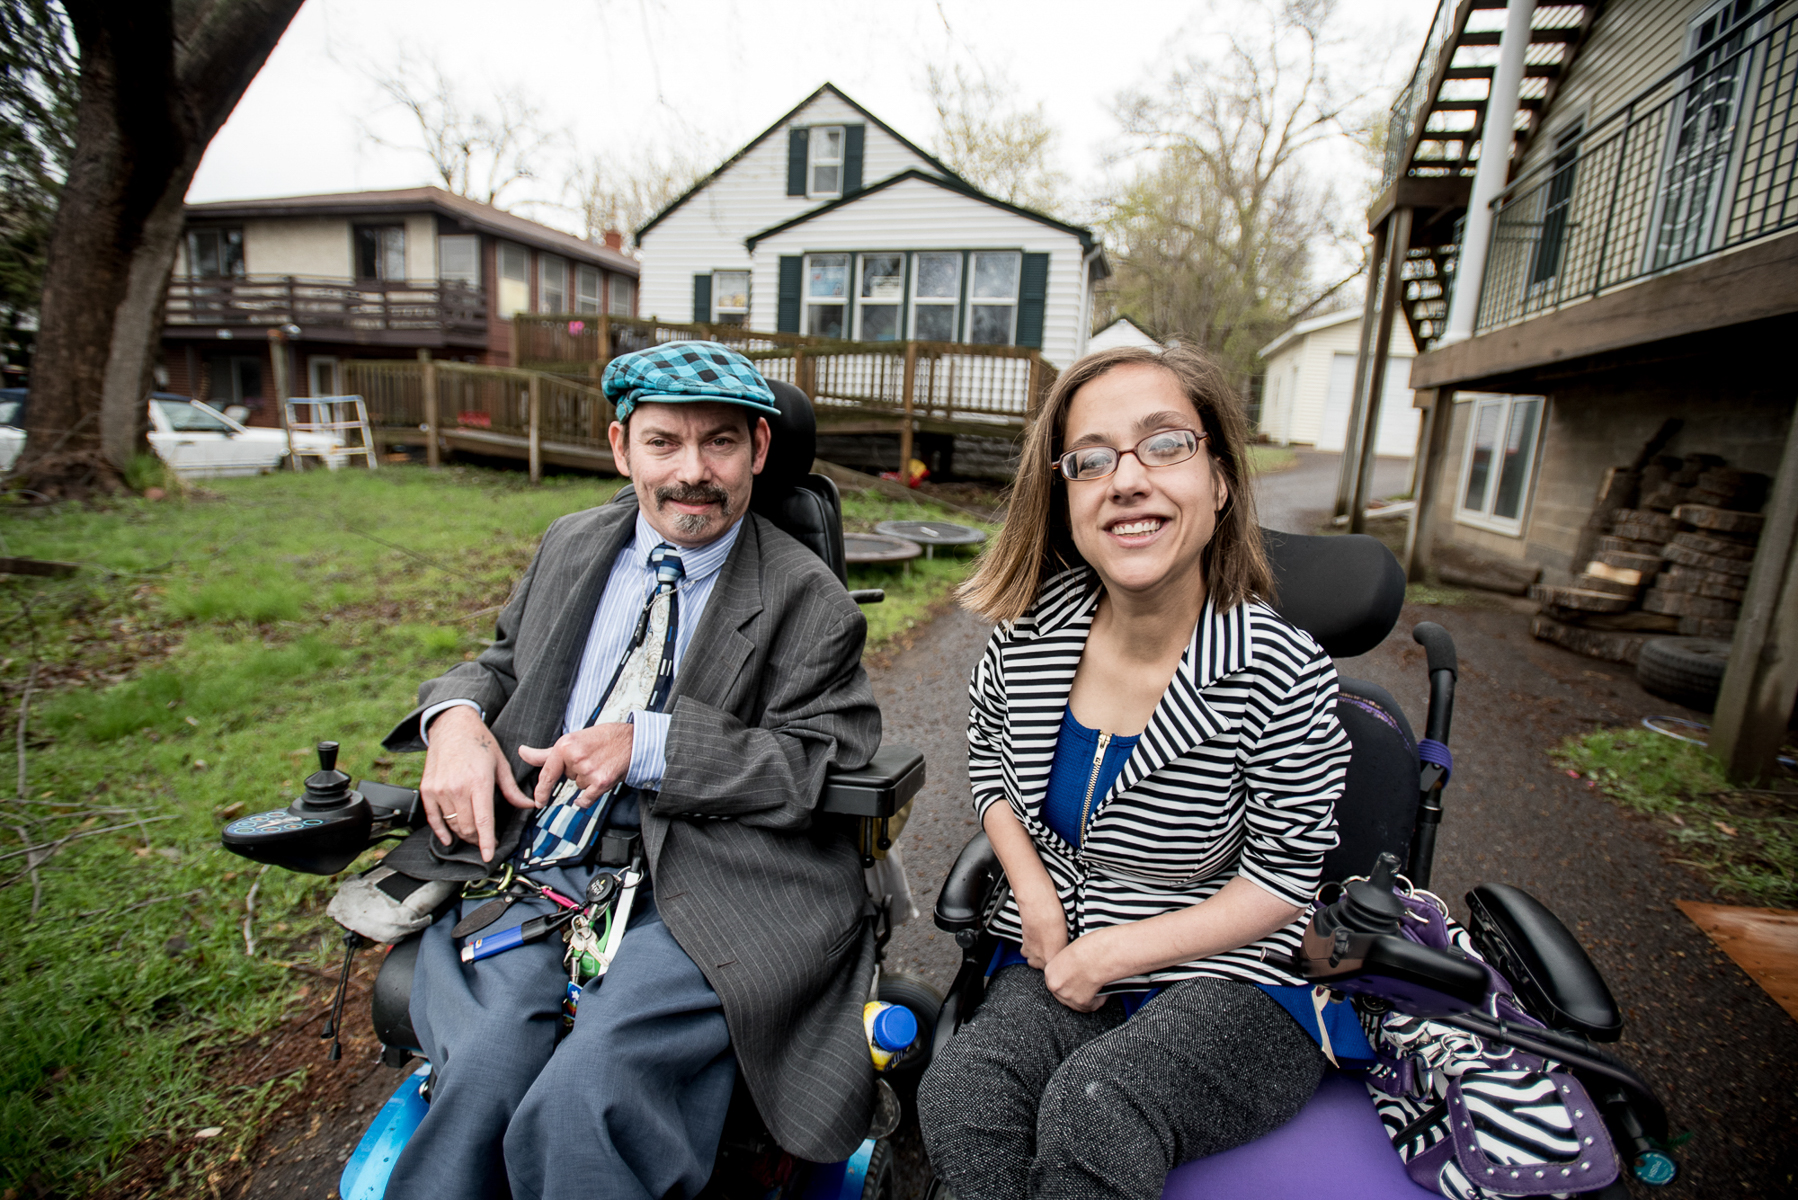 Darrell Paulsen and Nikki Villavicencio pose for a portrait outside their home in Maplewood, Minneosta on April 20, 2017.